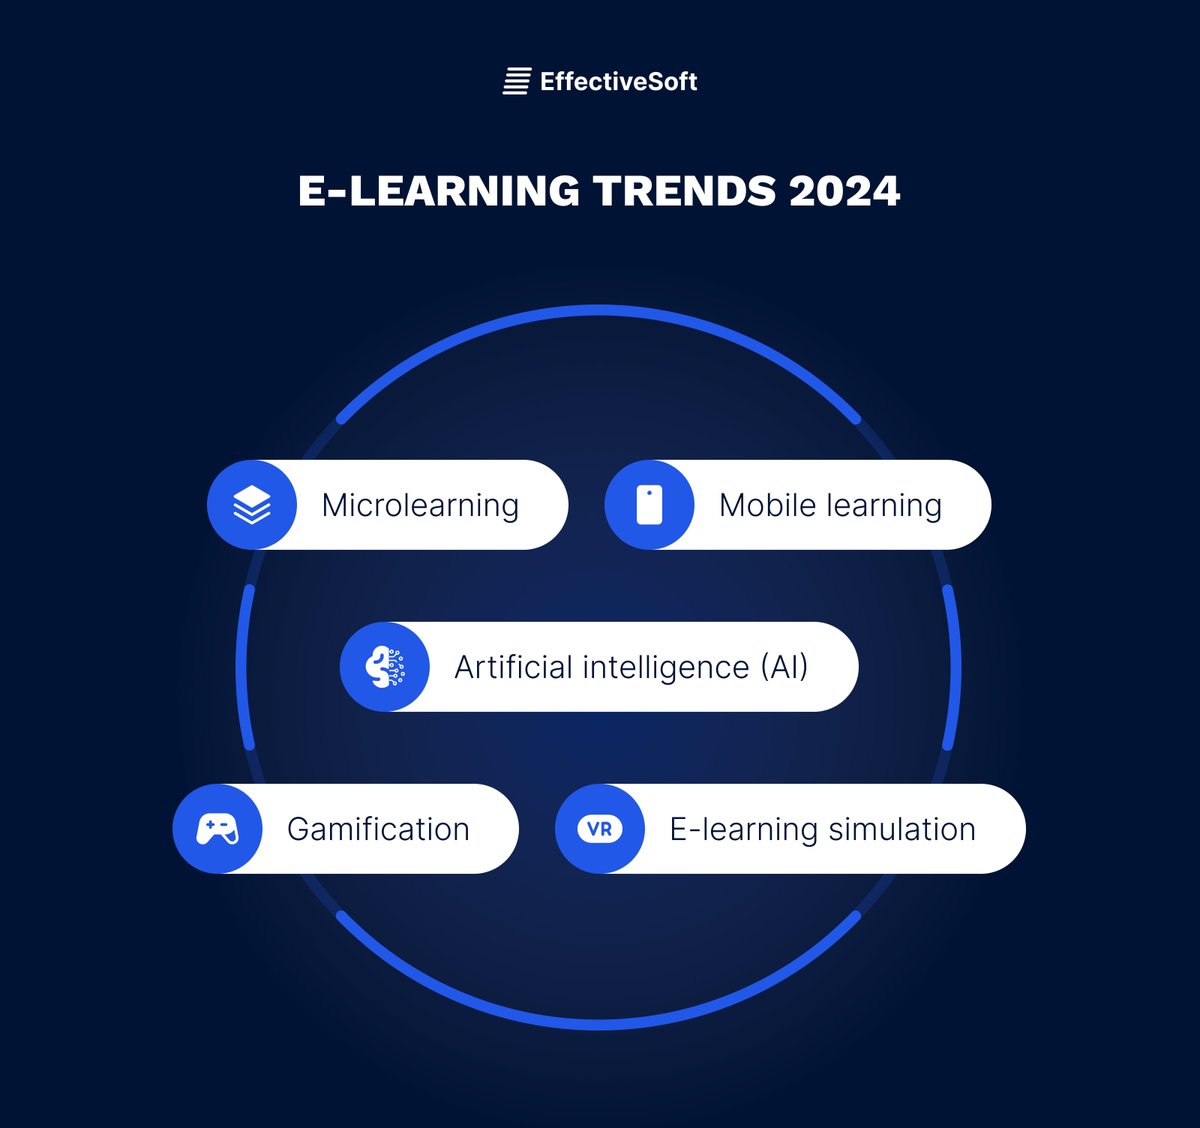 Since technology is an integral part of #elearning, new e-learning industry trends appear as it advances. Below, find the most promising #techtrends for 2024. Contact our experts to find out more about #elearningdevelopment and boost your learning outcomes.